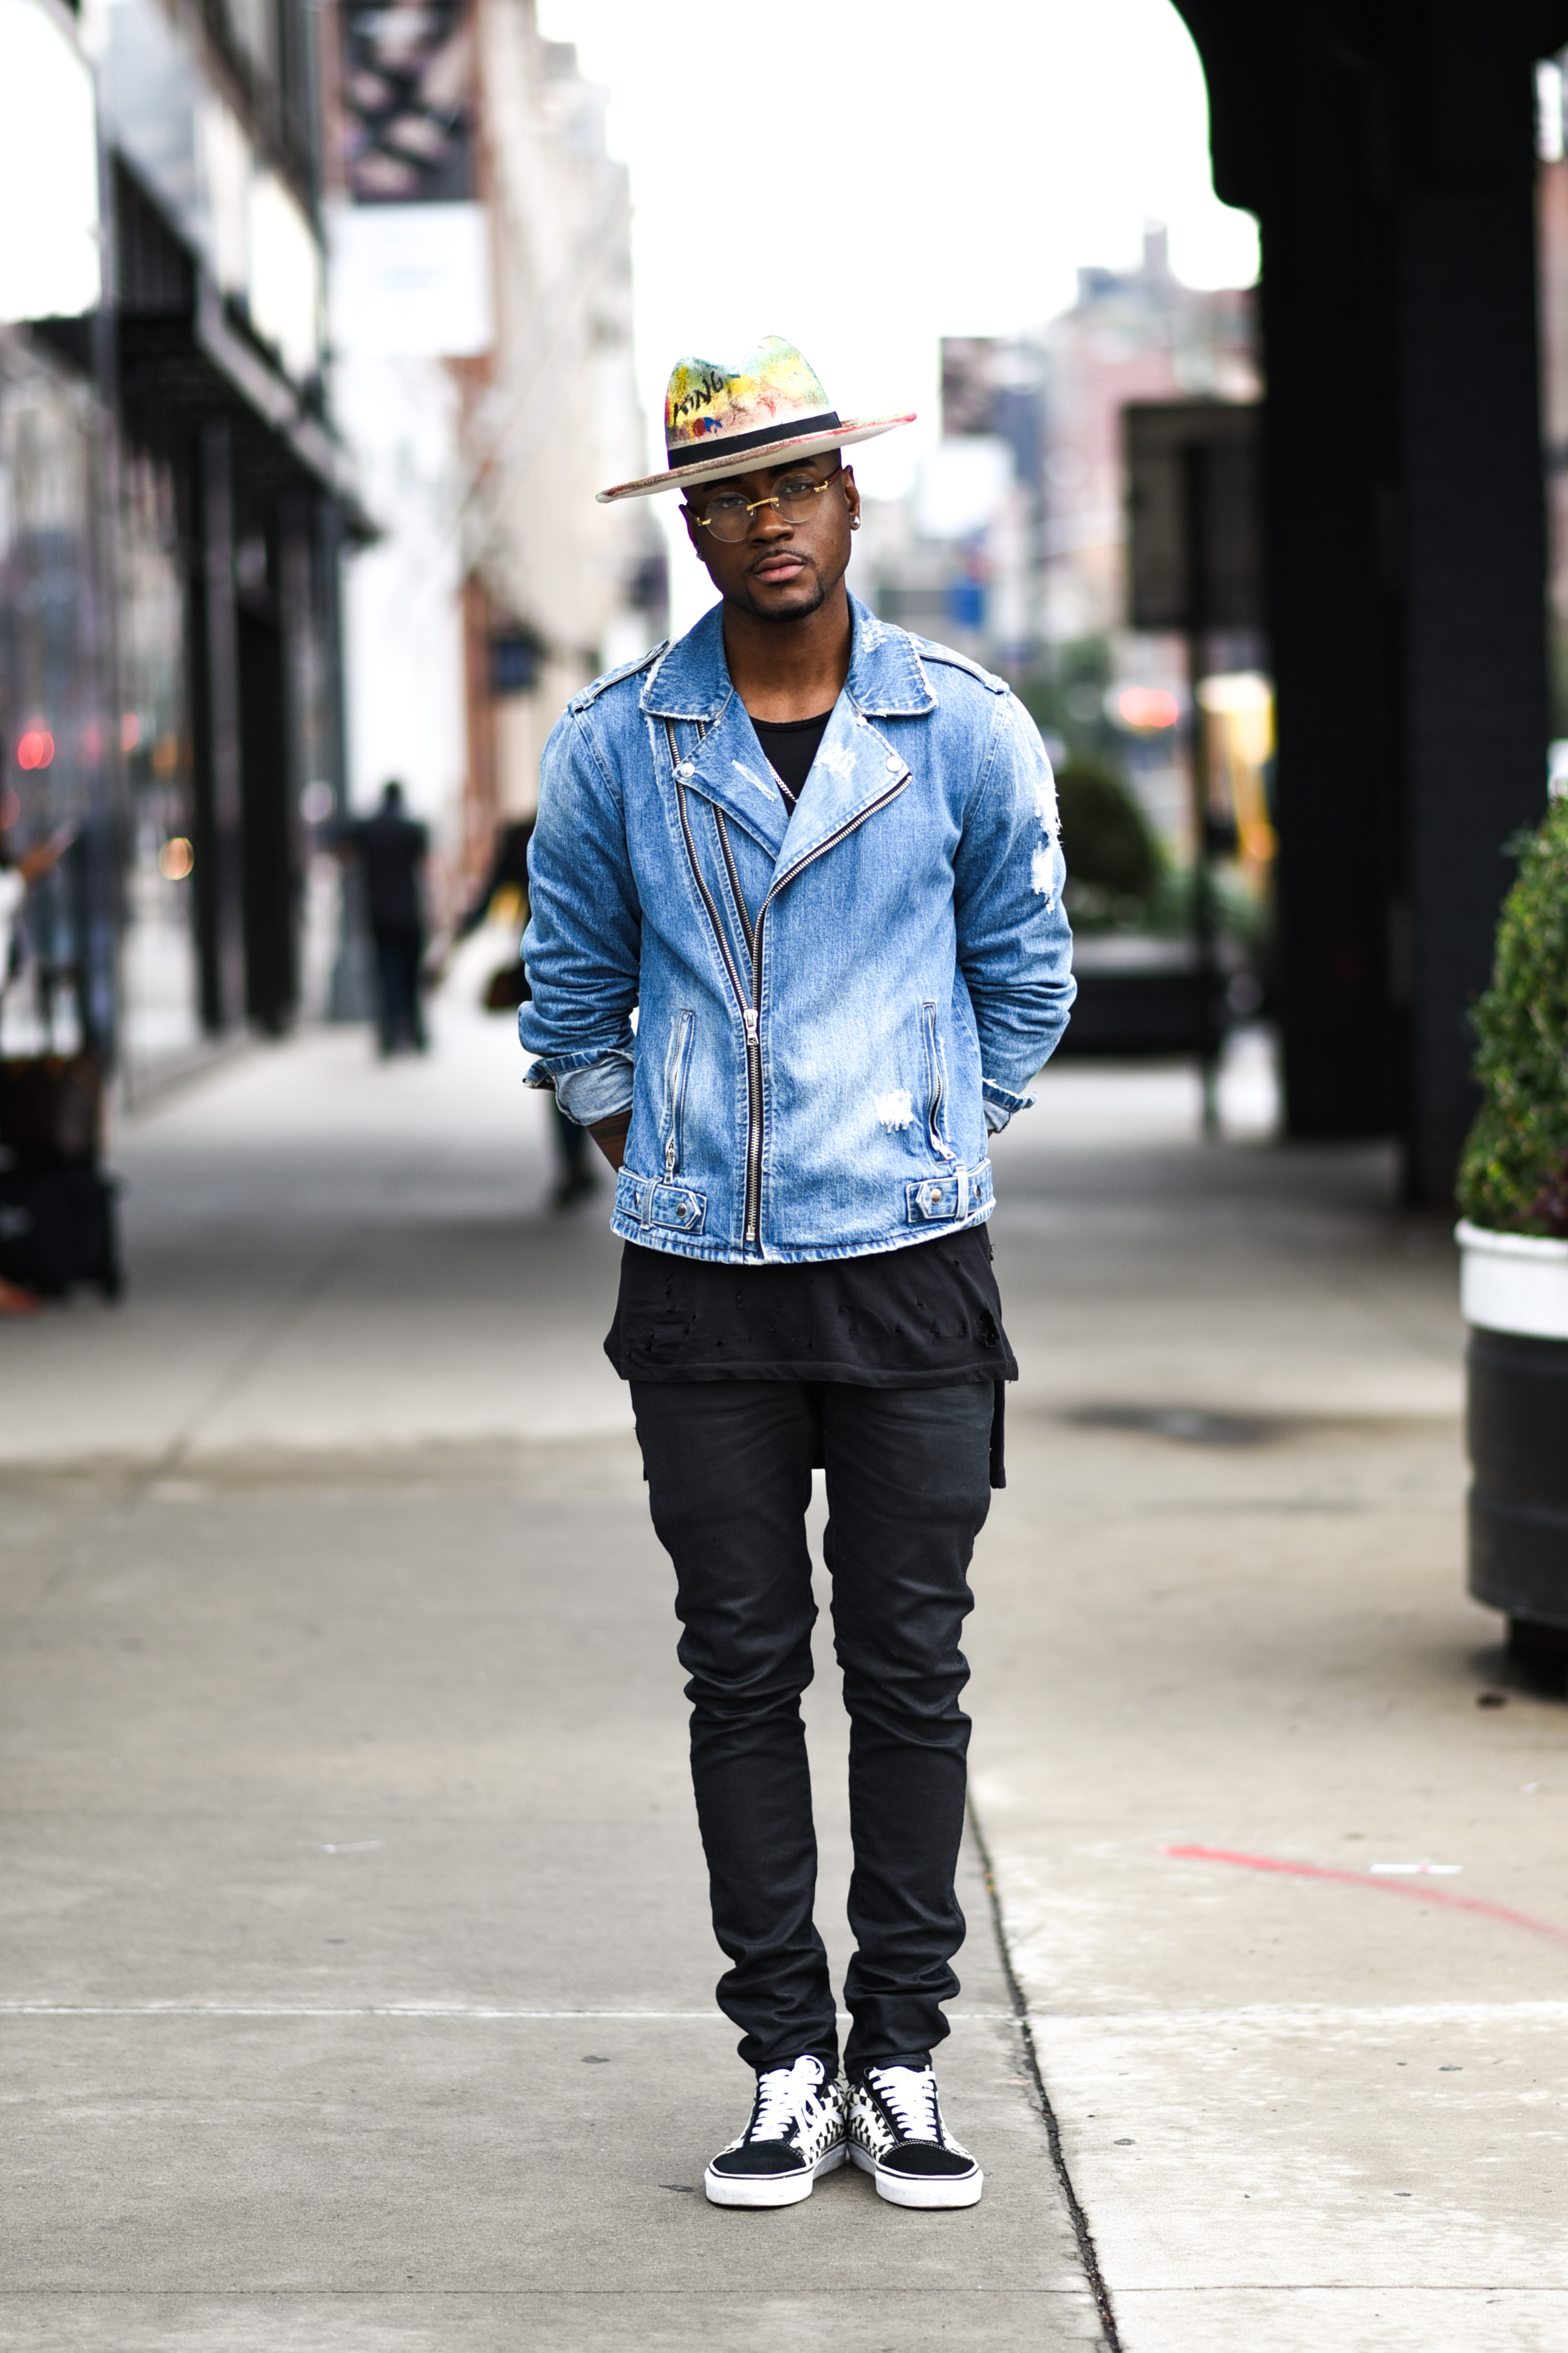 On The Scene: The Final Street Style + Interviews for New York Fashion ...